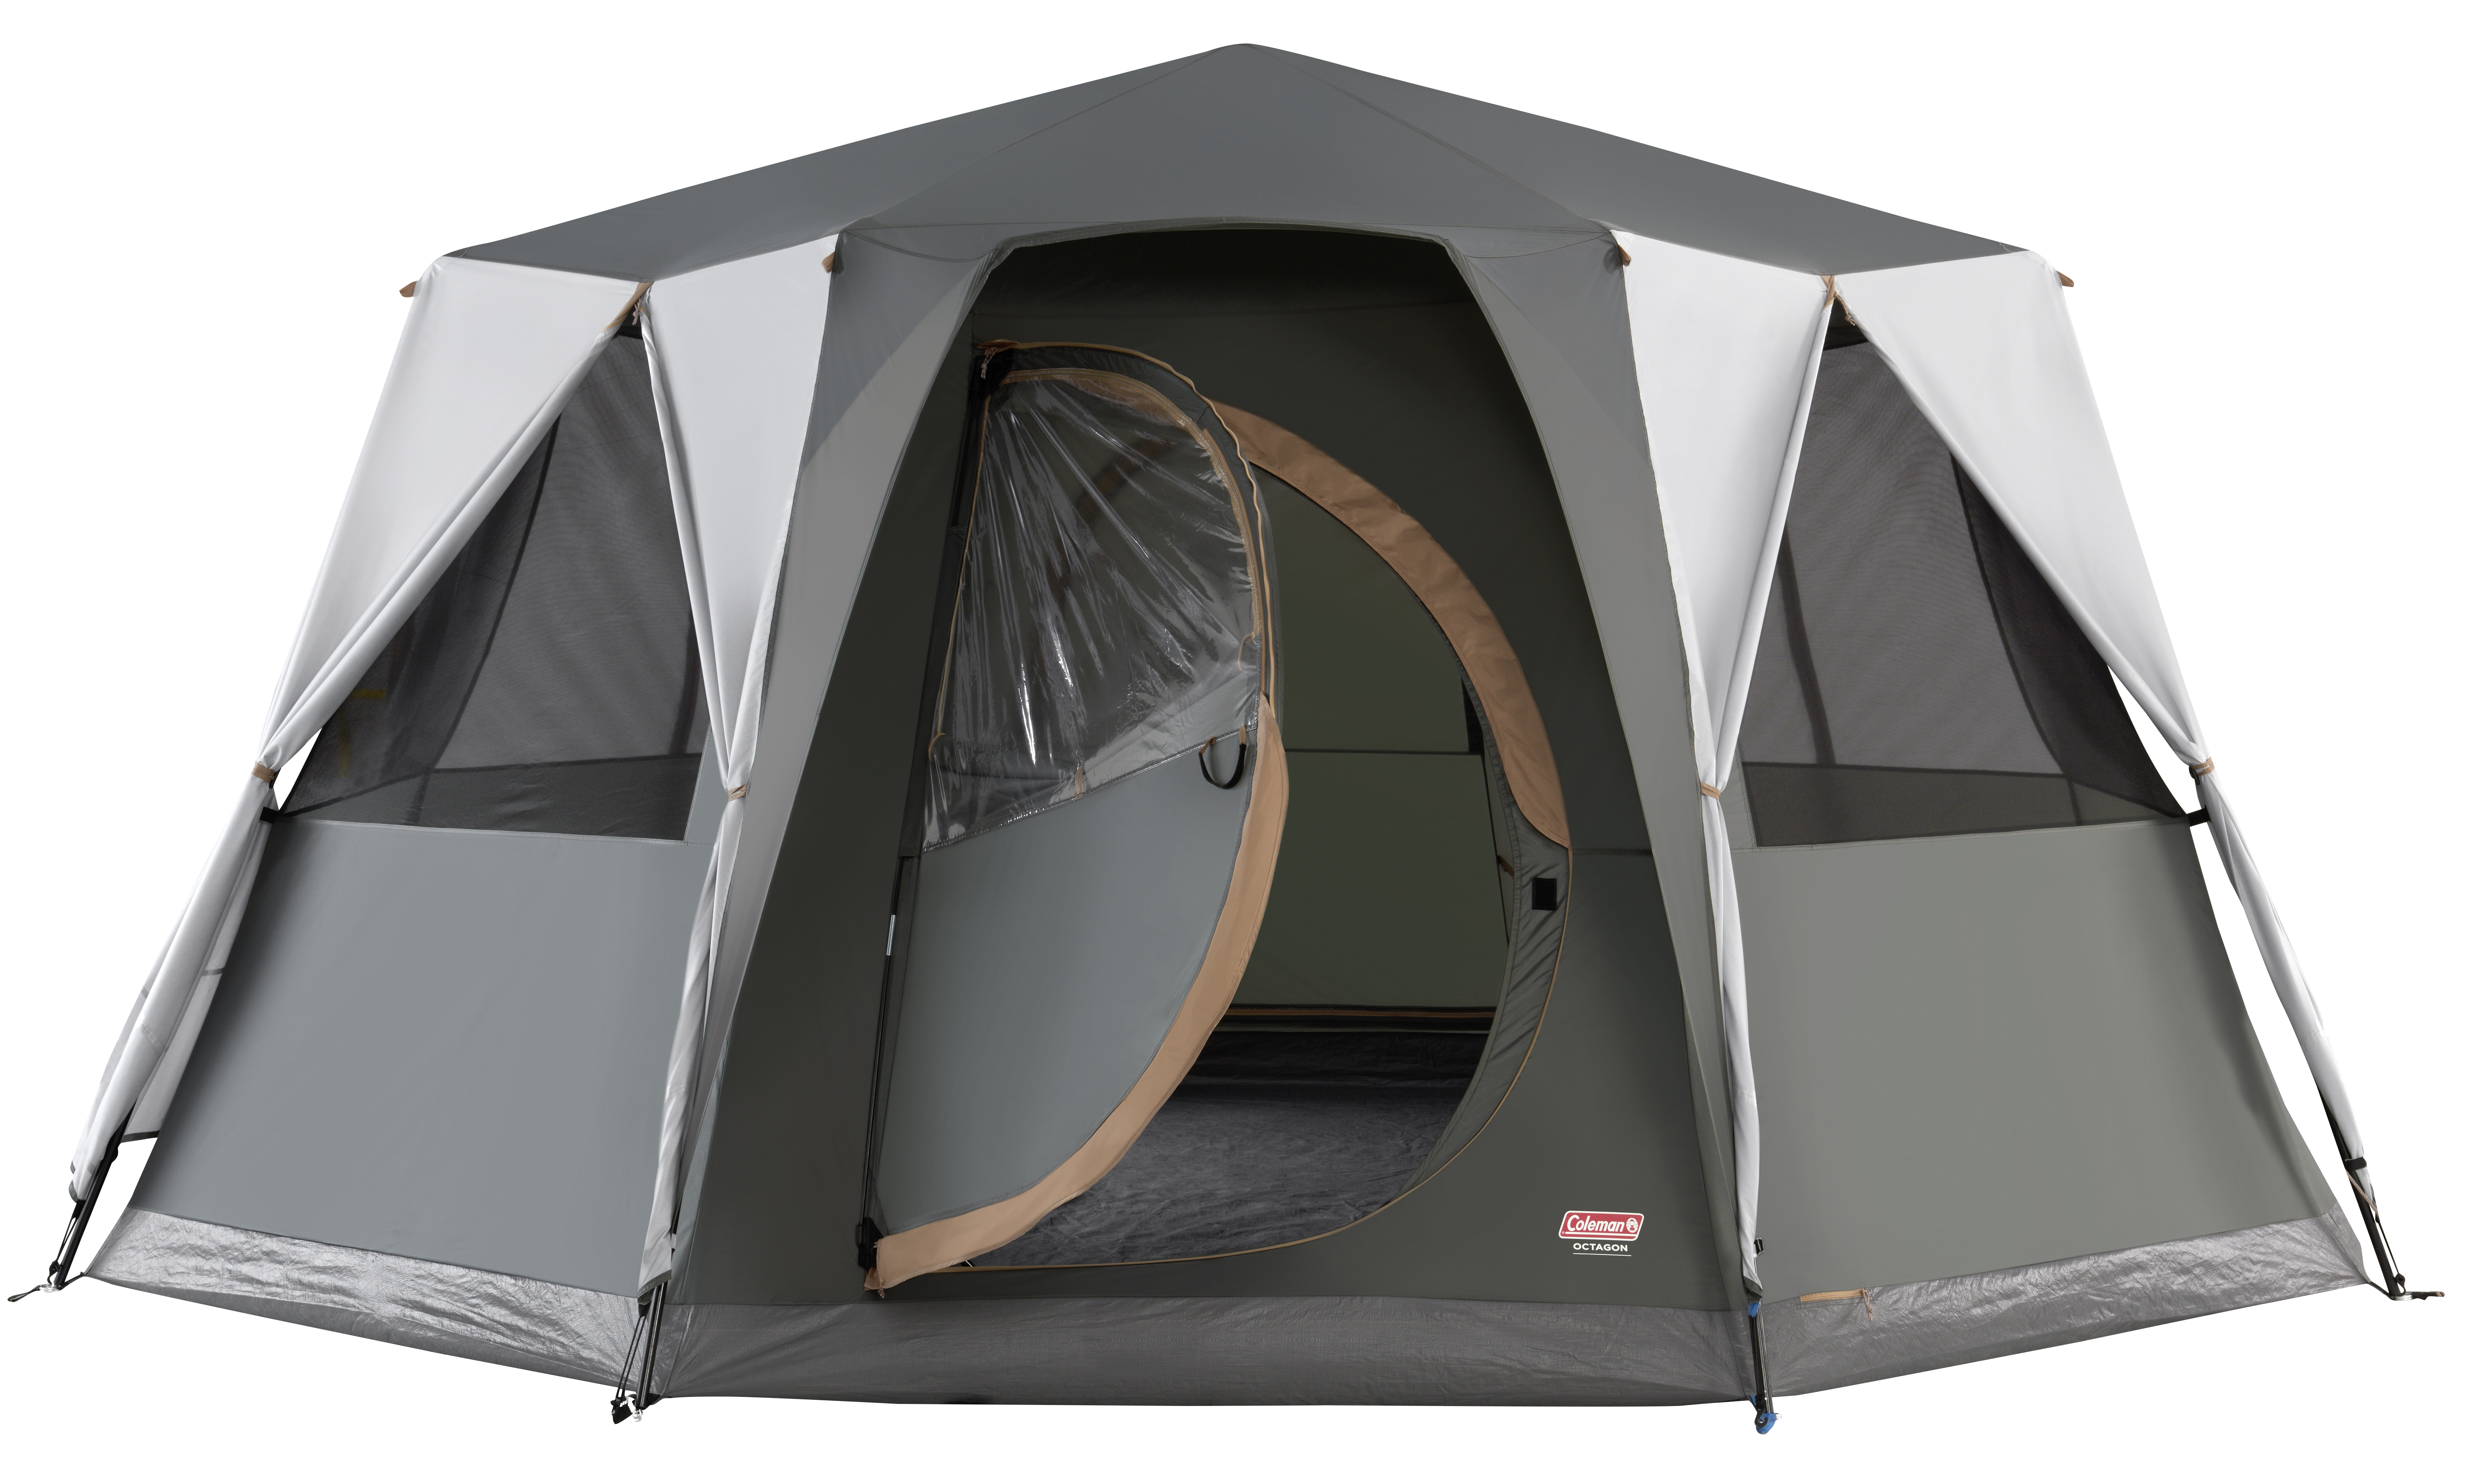 View All Tents & Shelters | Coleman UK